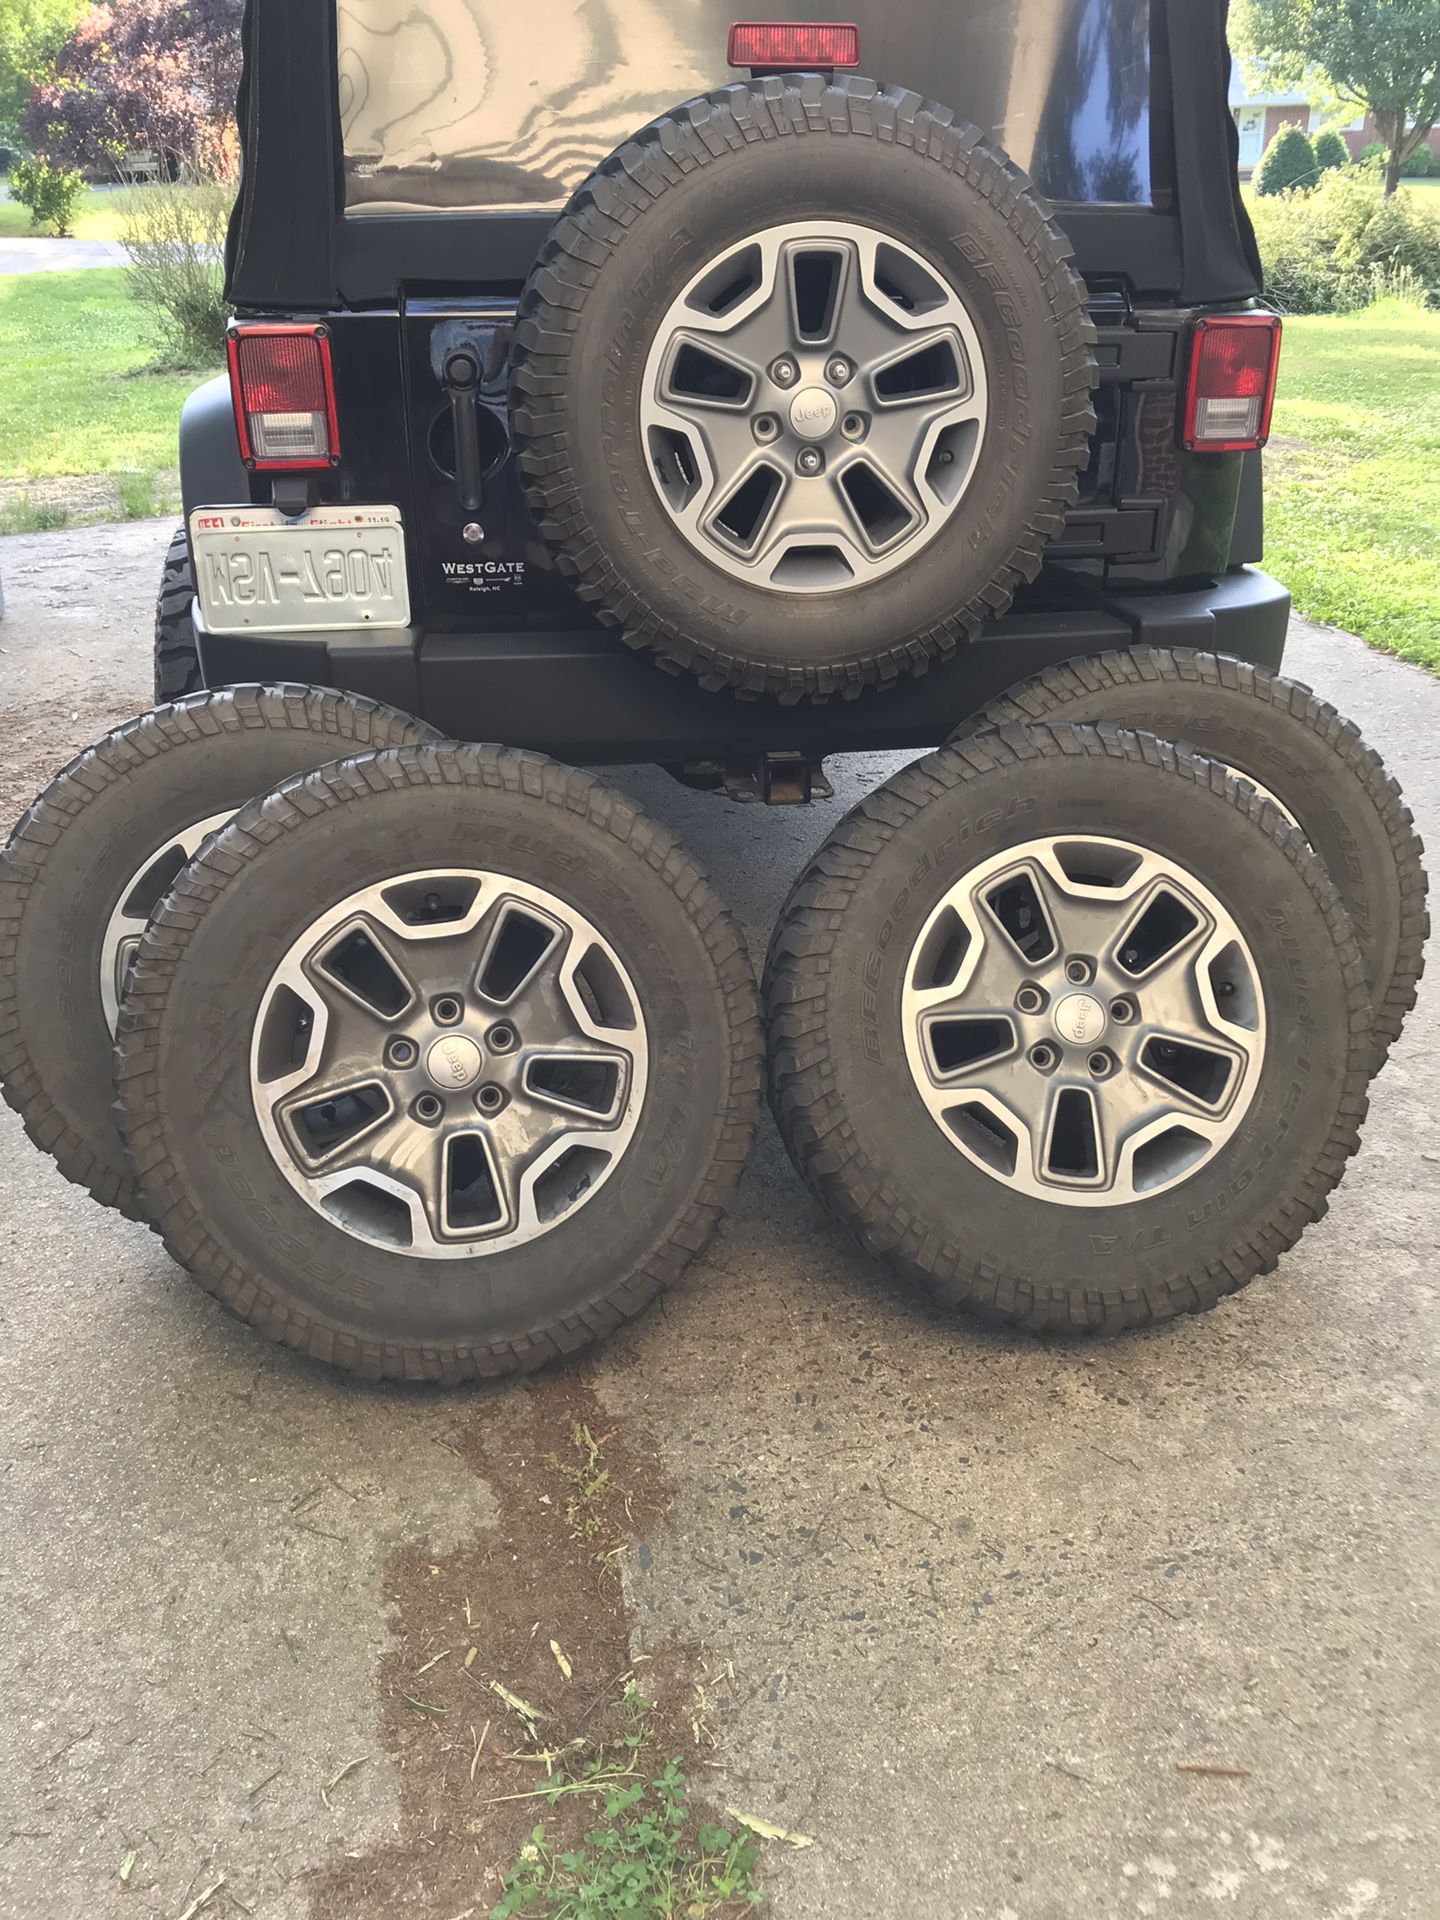 Jeep Wrangler tires and wheels 255/75R17 spare tire is brand new . The other 4 tires have about 60 % tread on them .